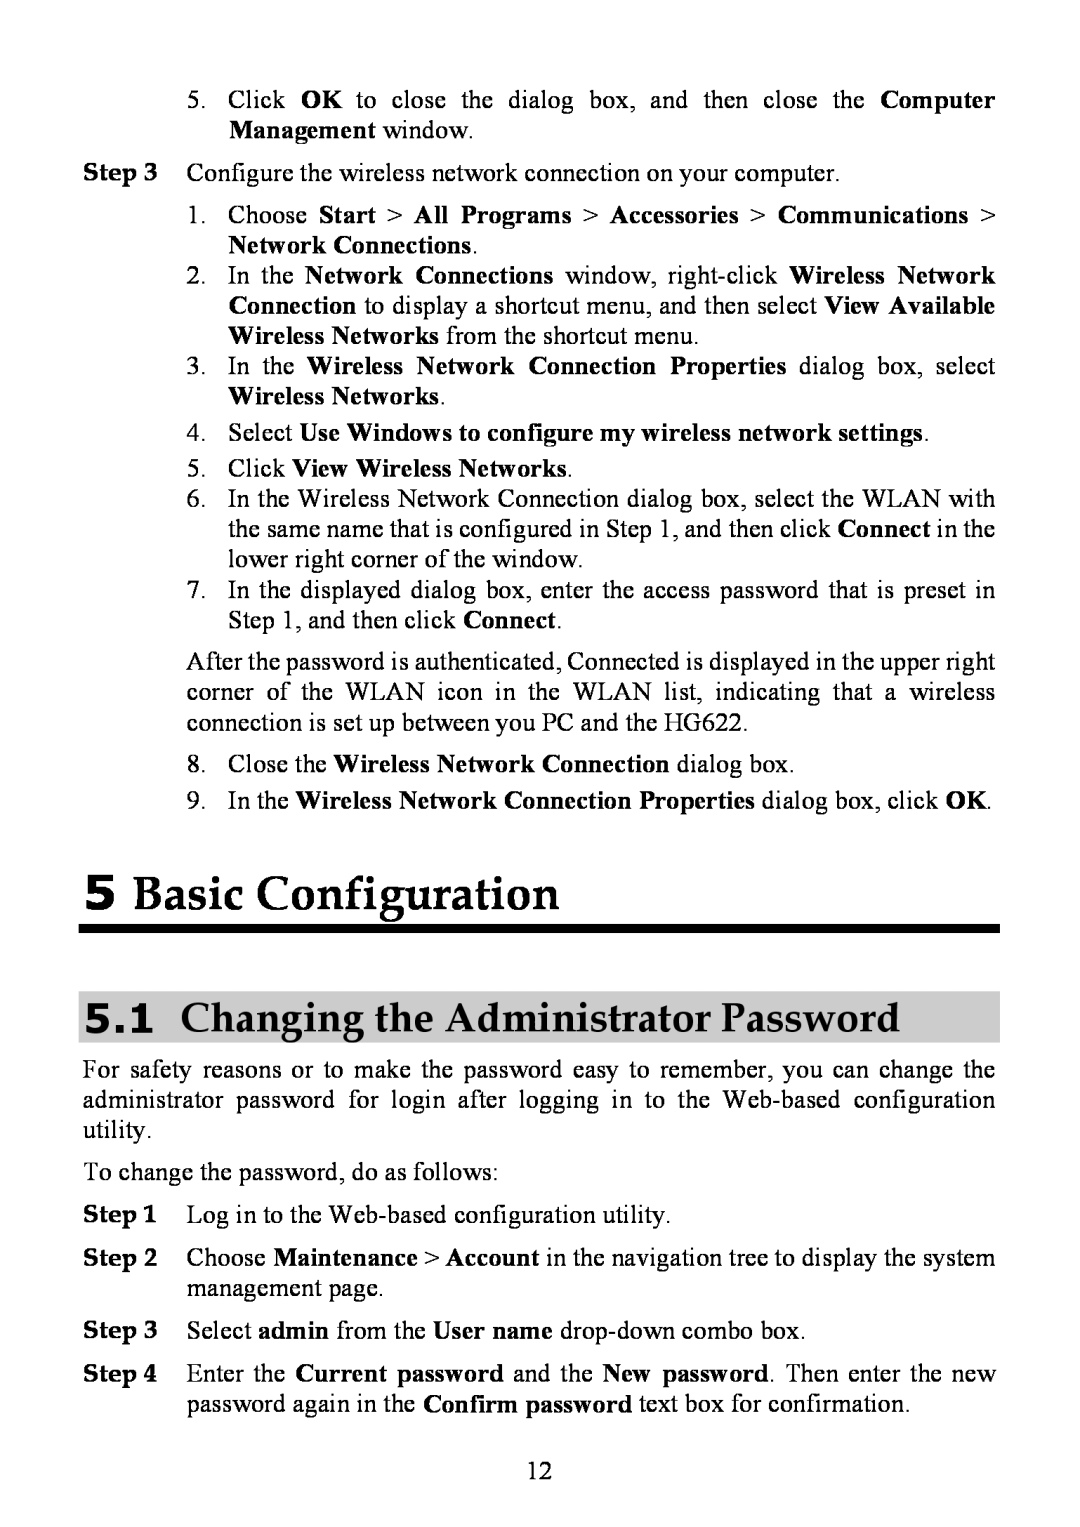 Huawei HG622 manual 5Basic Configuration, 5.1Changing the Administrator Password 